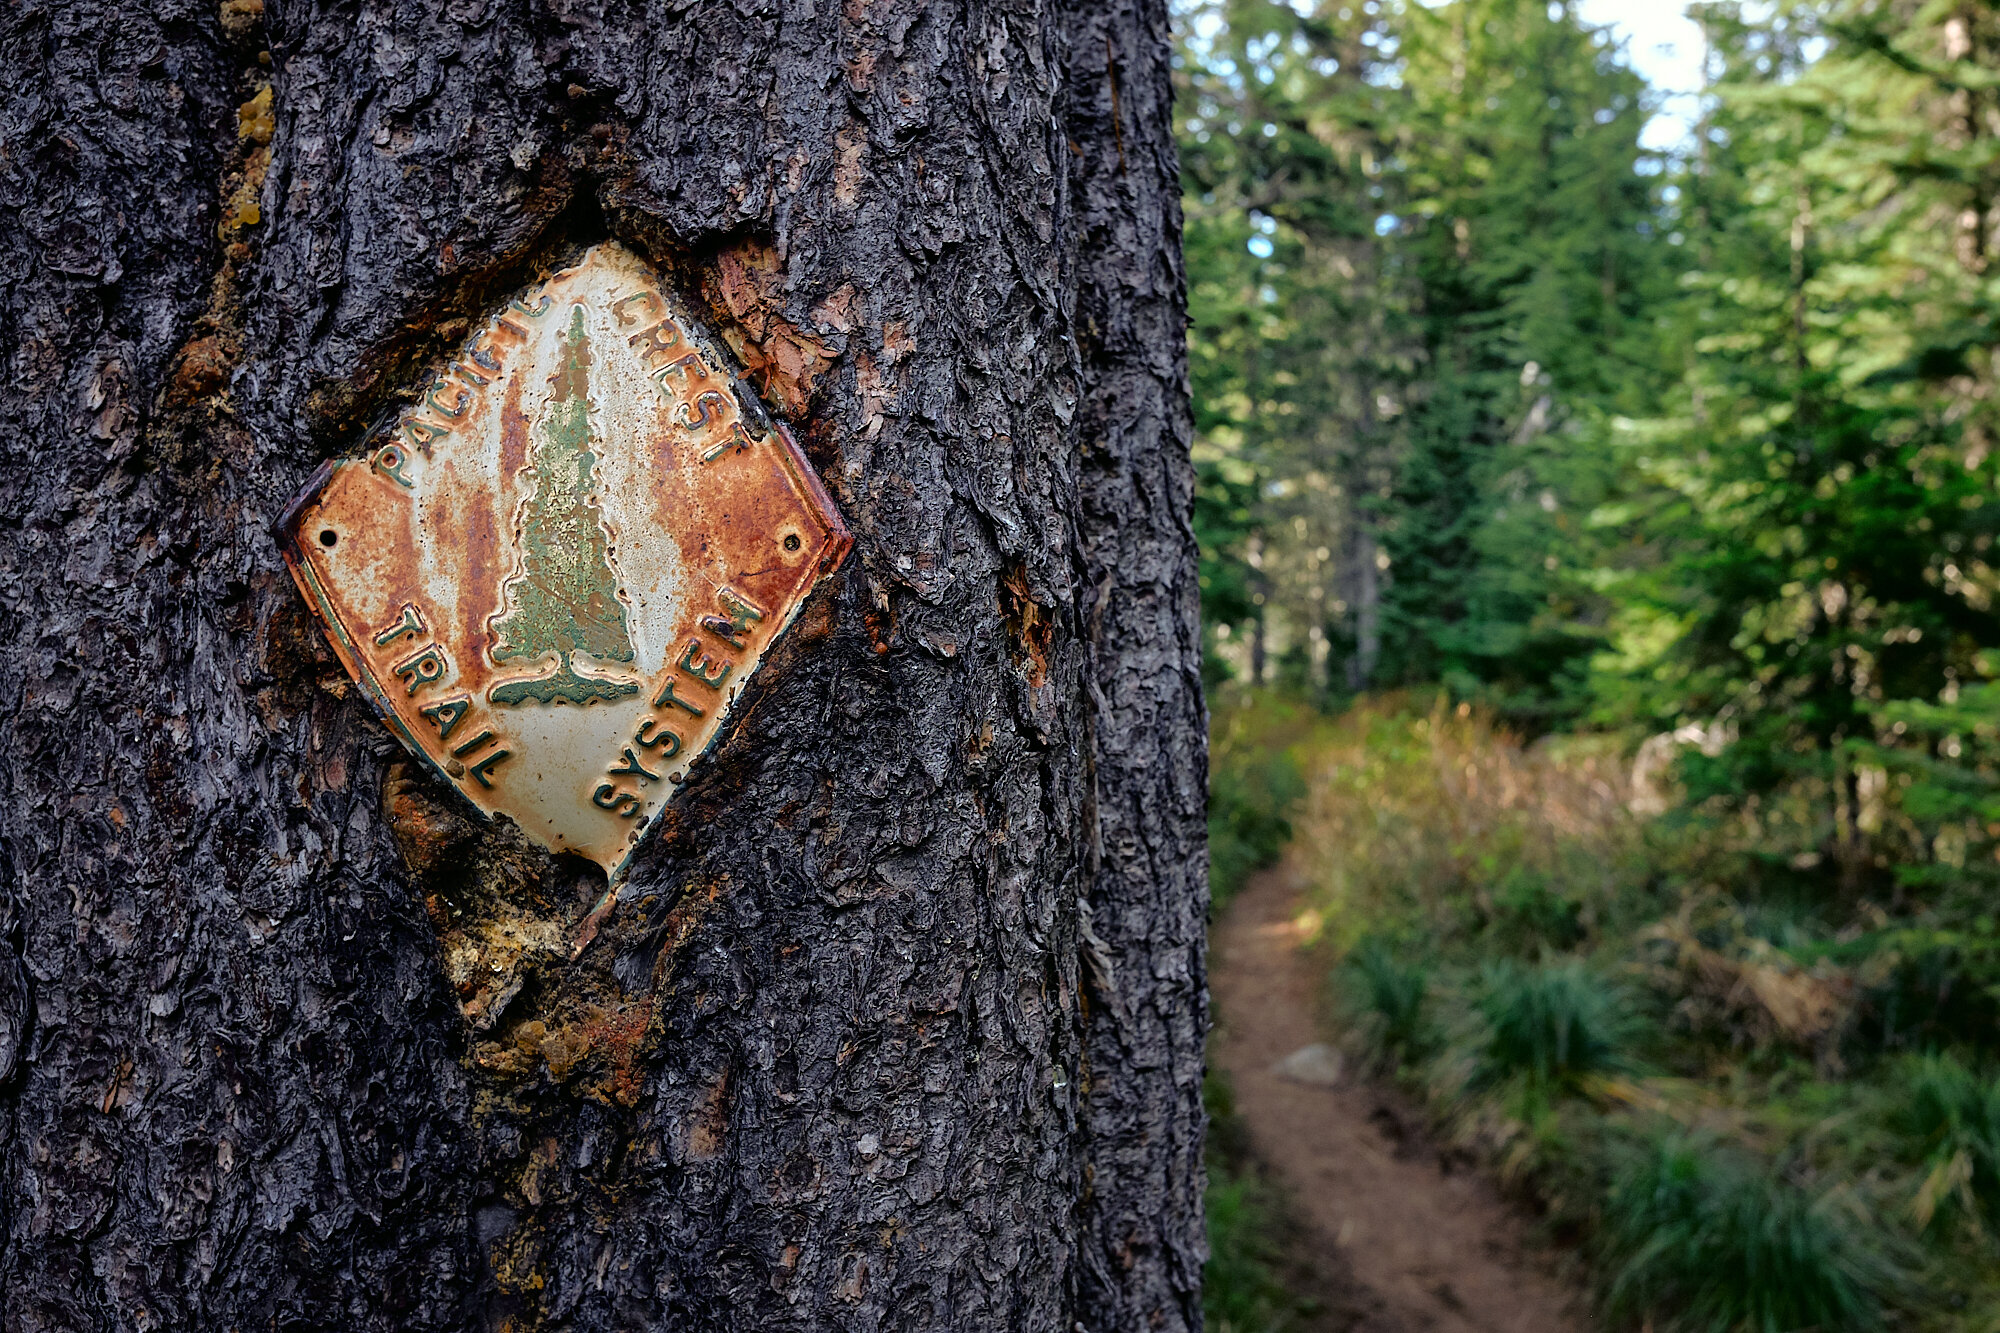  An old trail marker slowly being consumed by a tree. | 9/14/19 2,199.6, 4,027' 